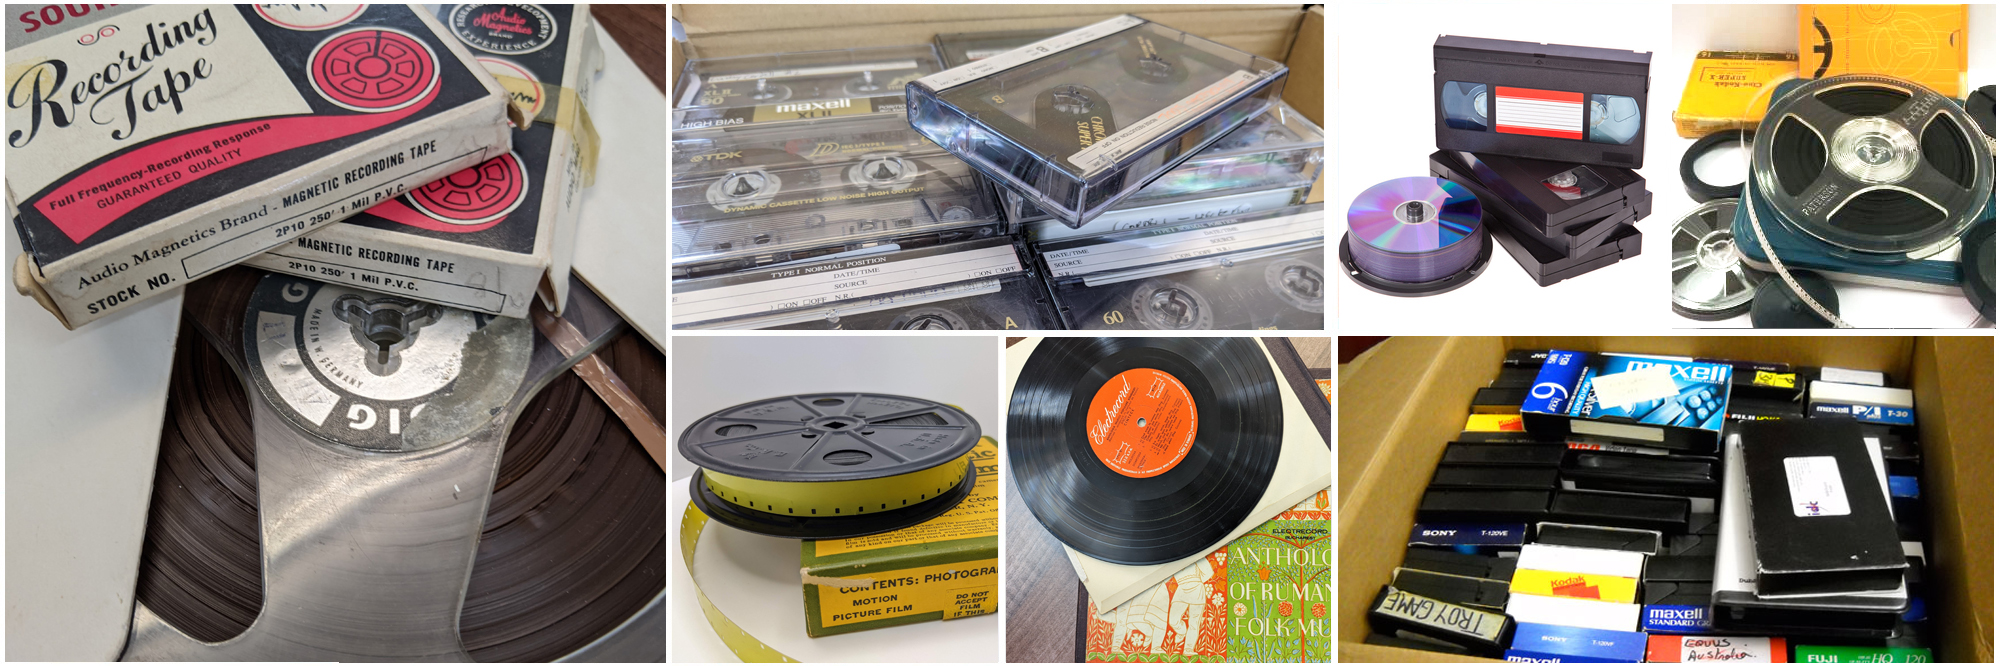 Family video and audio tape transfers in oxford uk